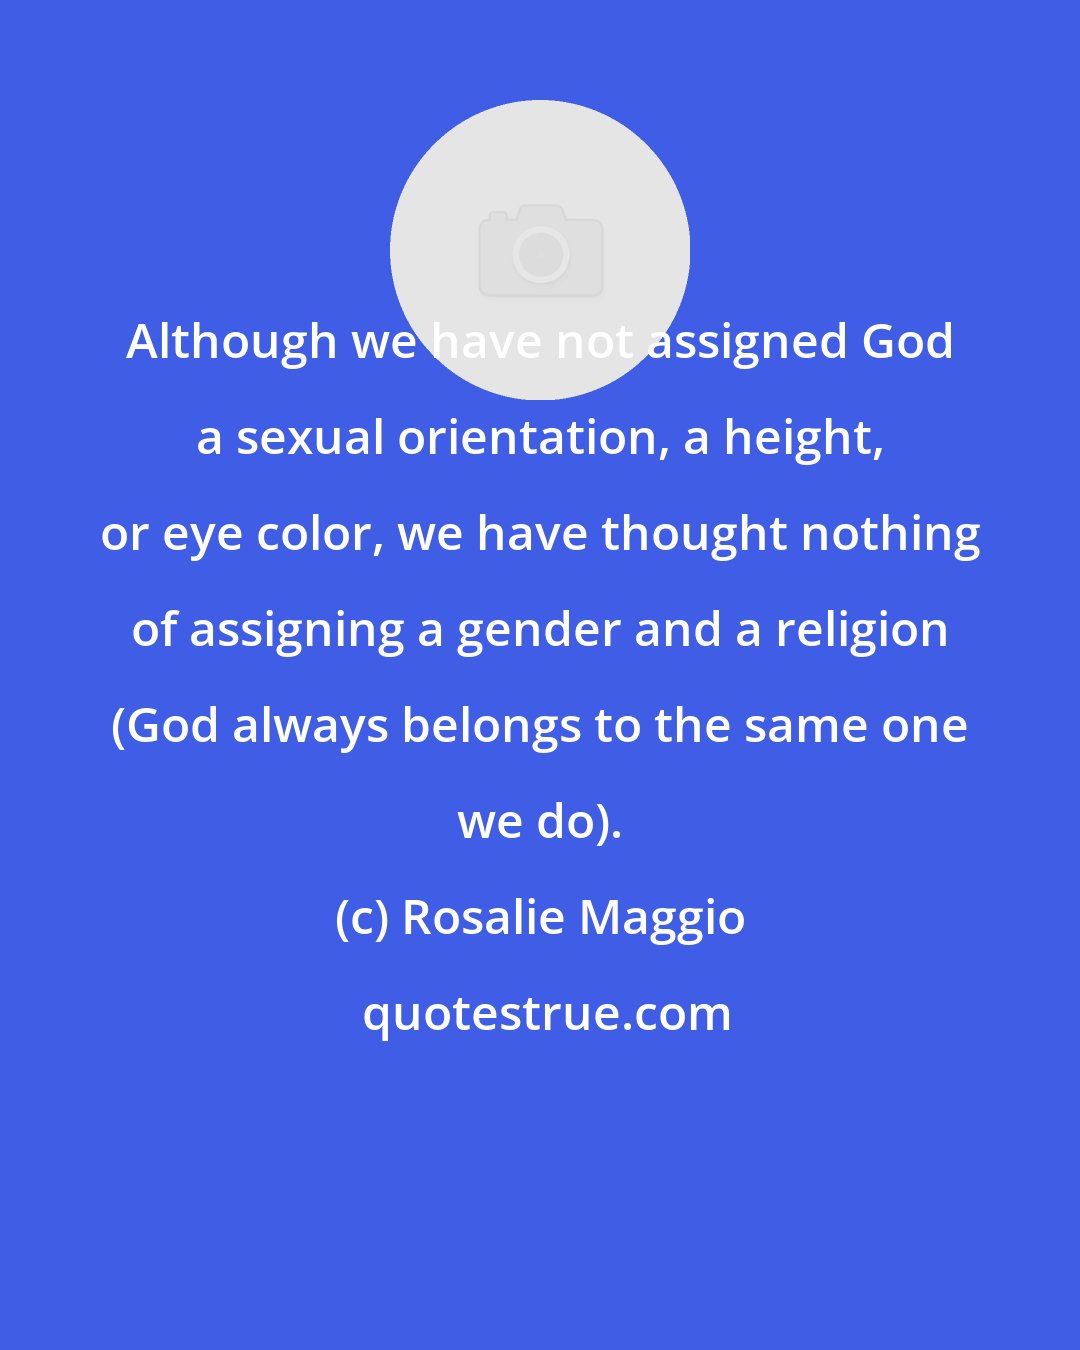 Rosalie Maggio: Although we have not assigned God a sexual orientation, a height, or eye color, we have thought nothing of assigning a gender and a religion (God always belongs to the same one we do).